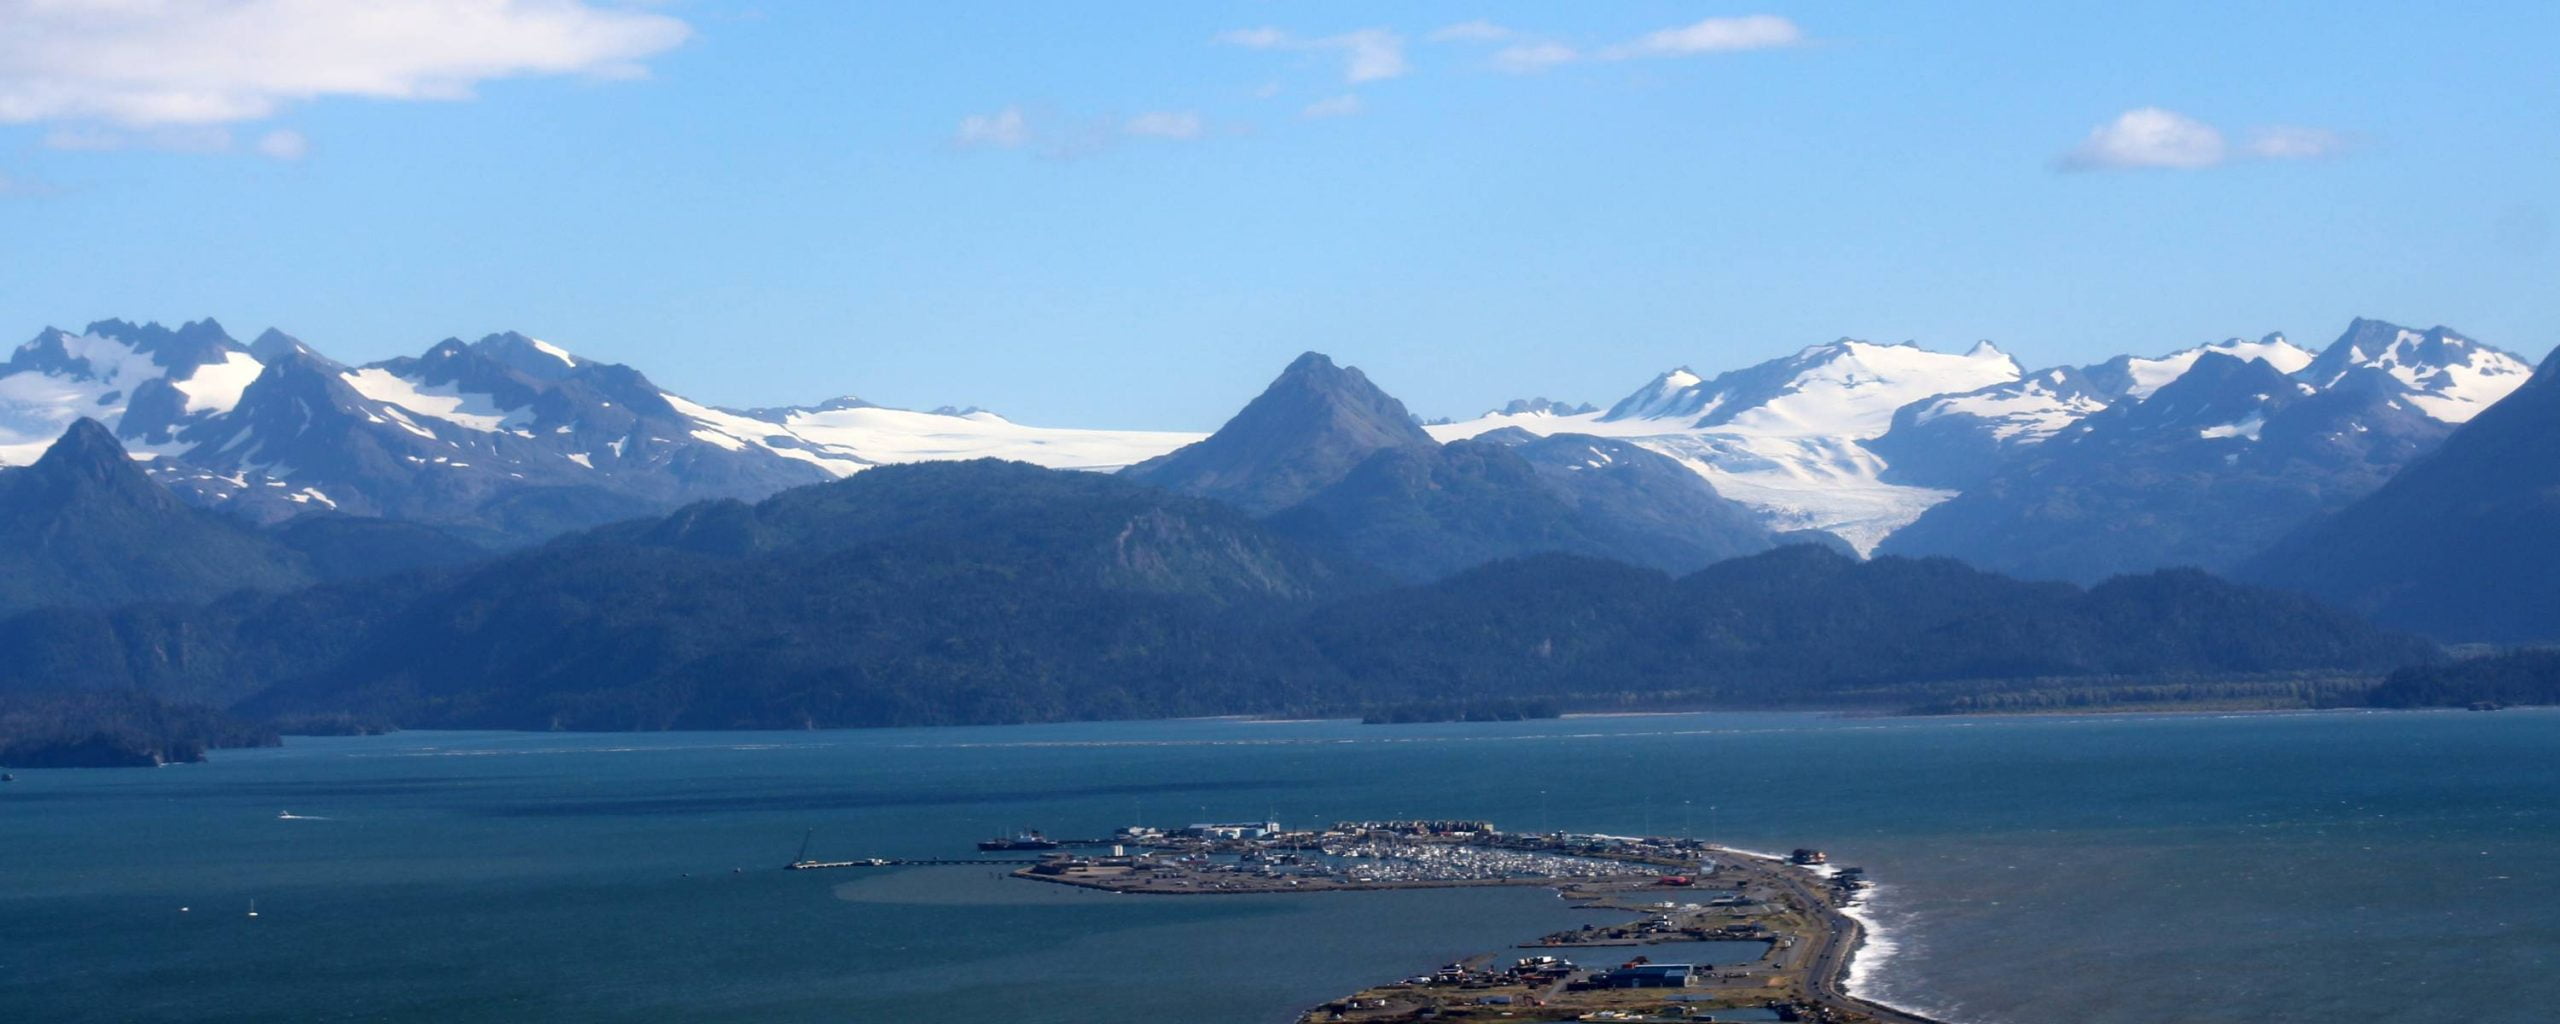 What is Homer Alaska Known For?